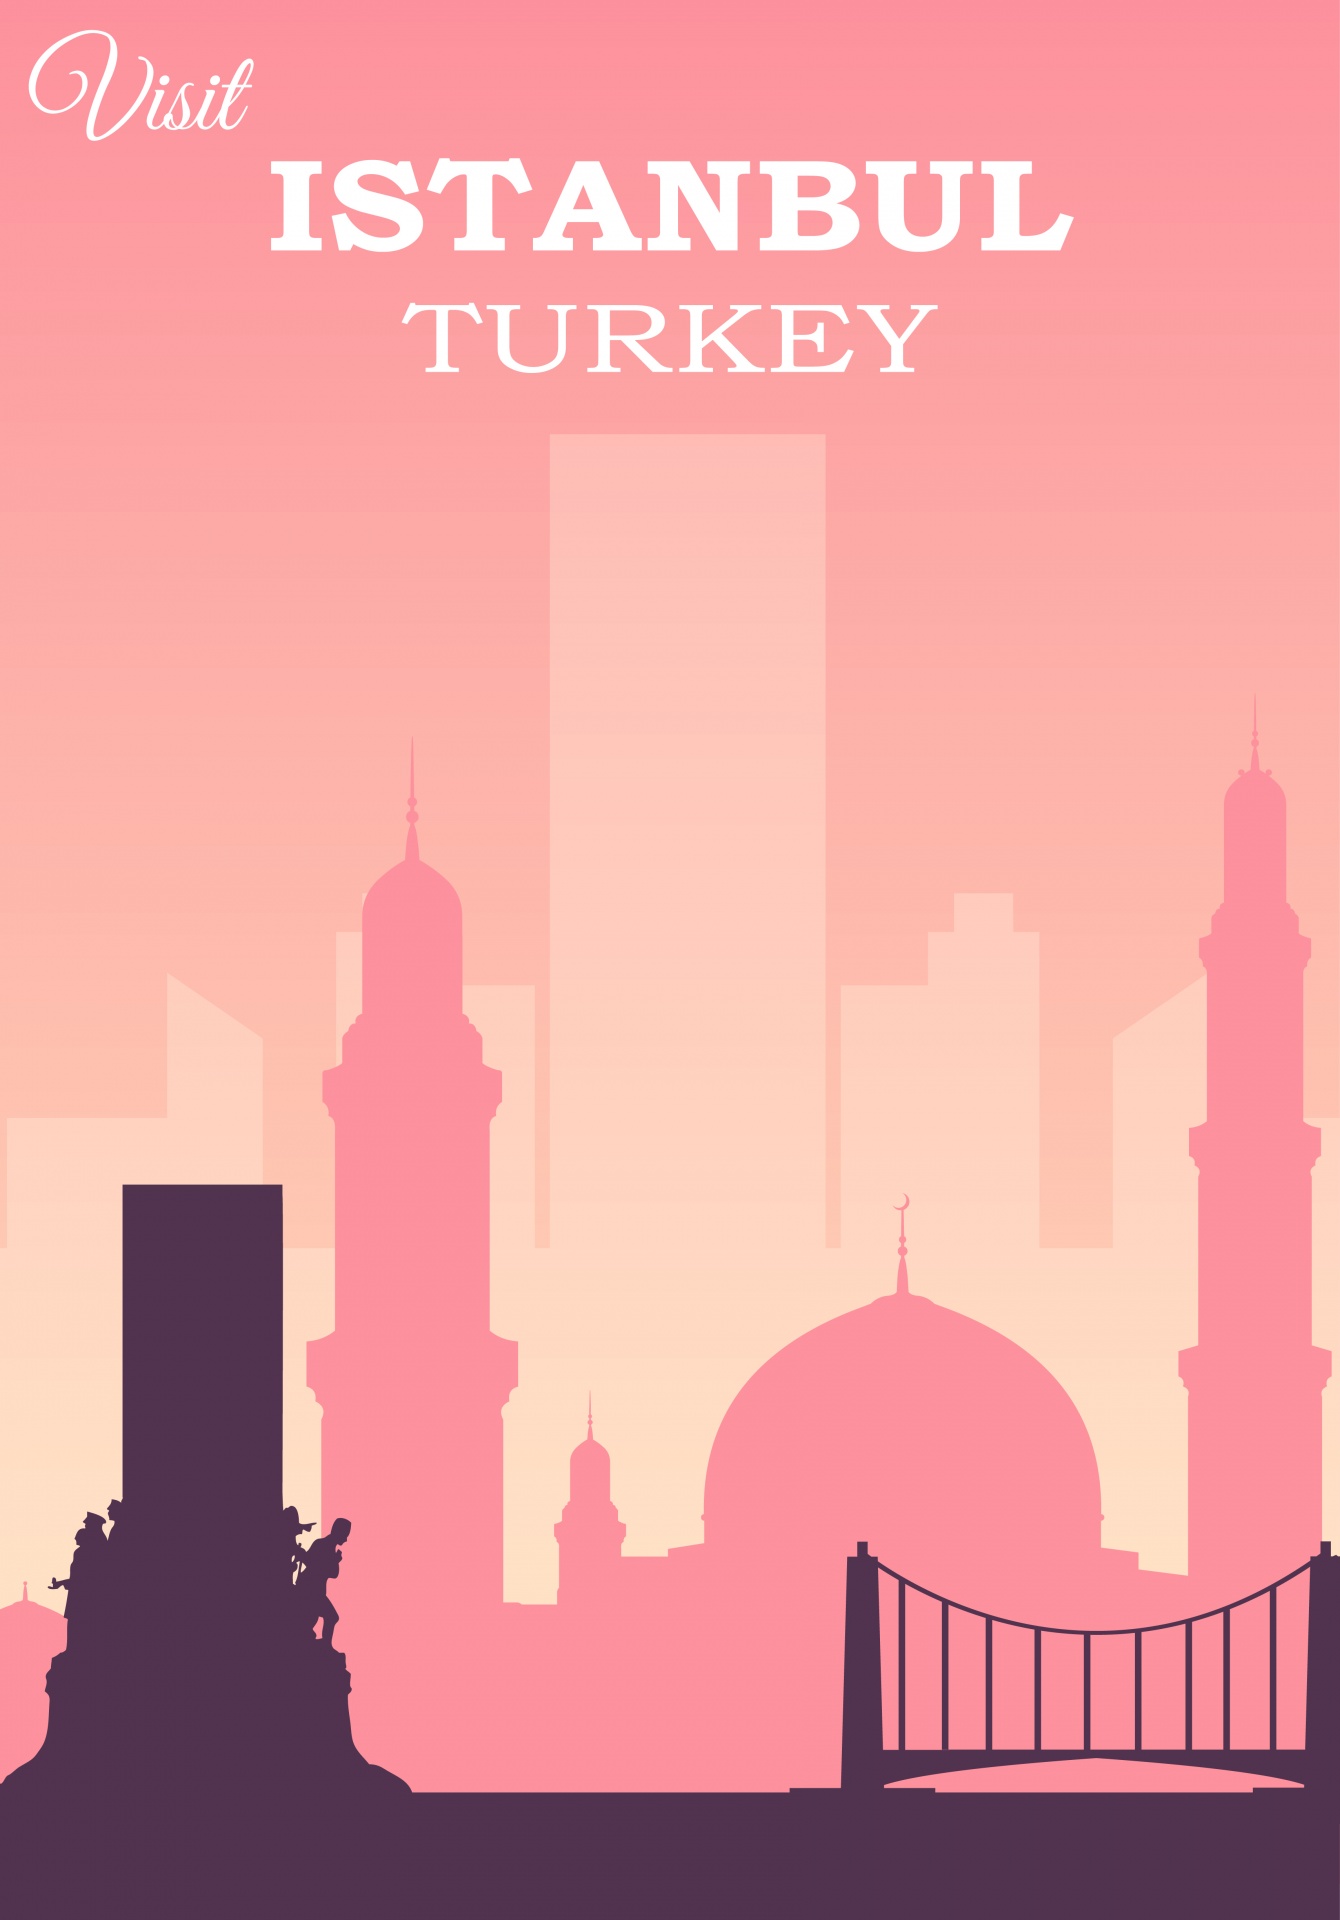 Modern travel Poster for Istanbul, Turkey in pink tones with city skyline and landmarks backdrop